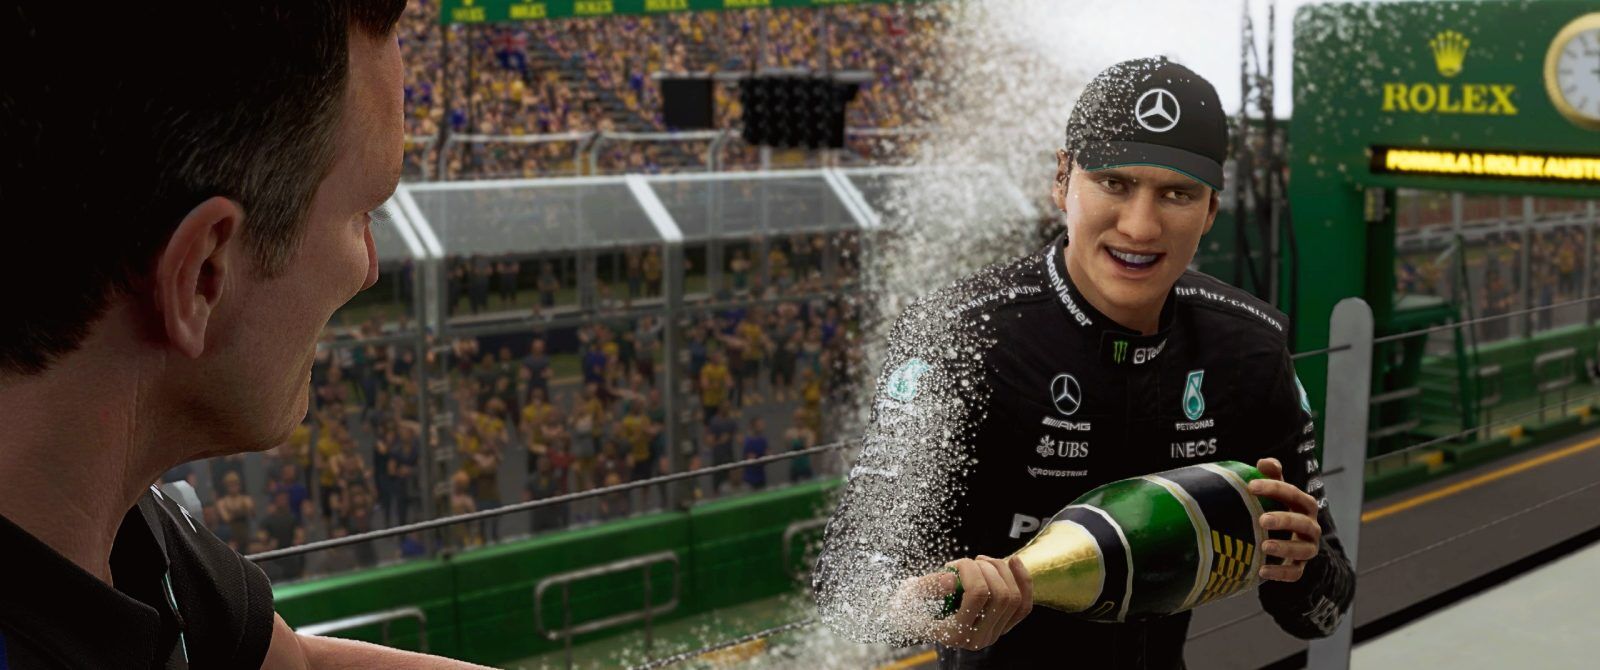 A guy in Mercedes overalls spraying champagne overlooking a racetrack.